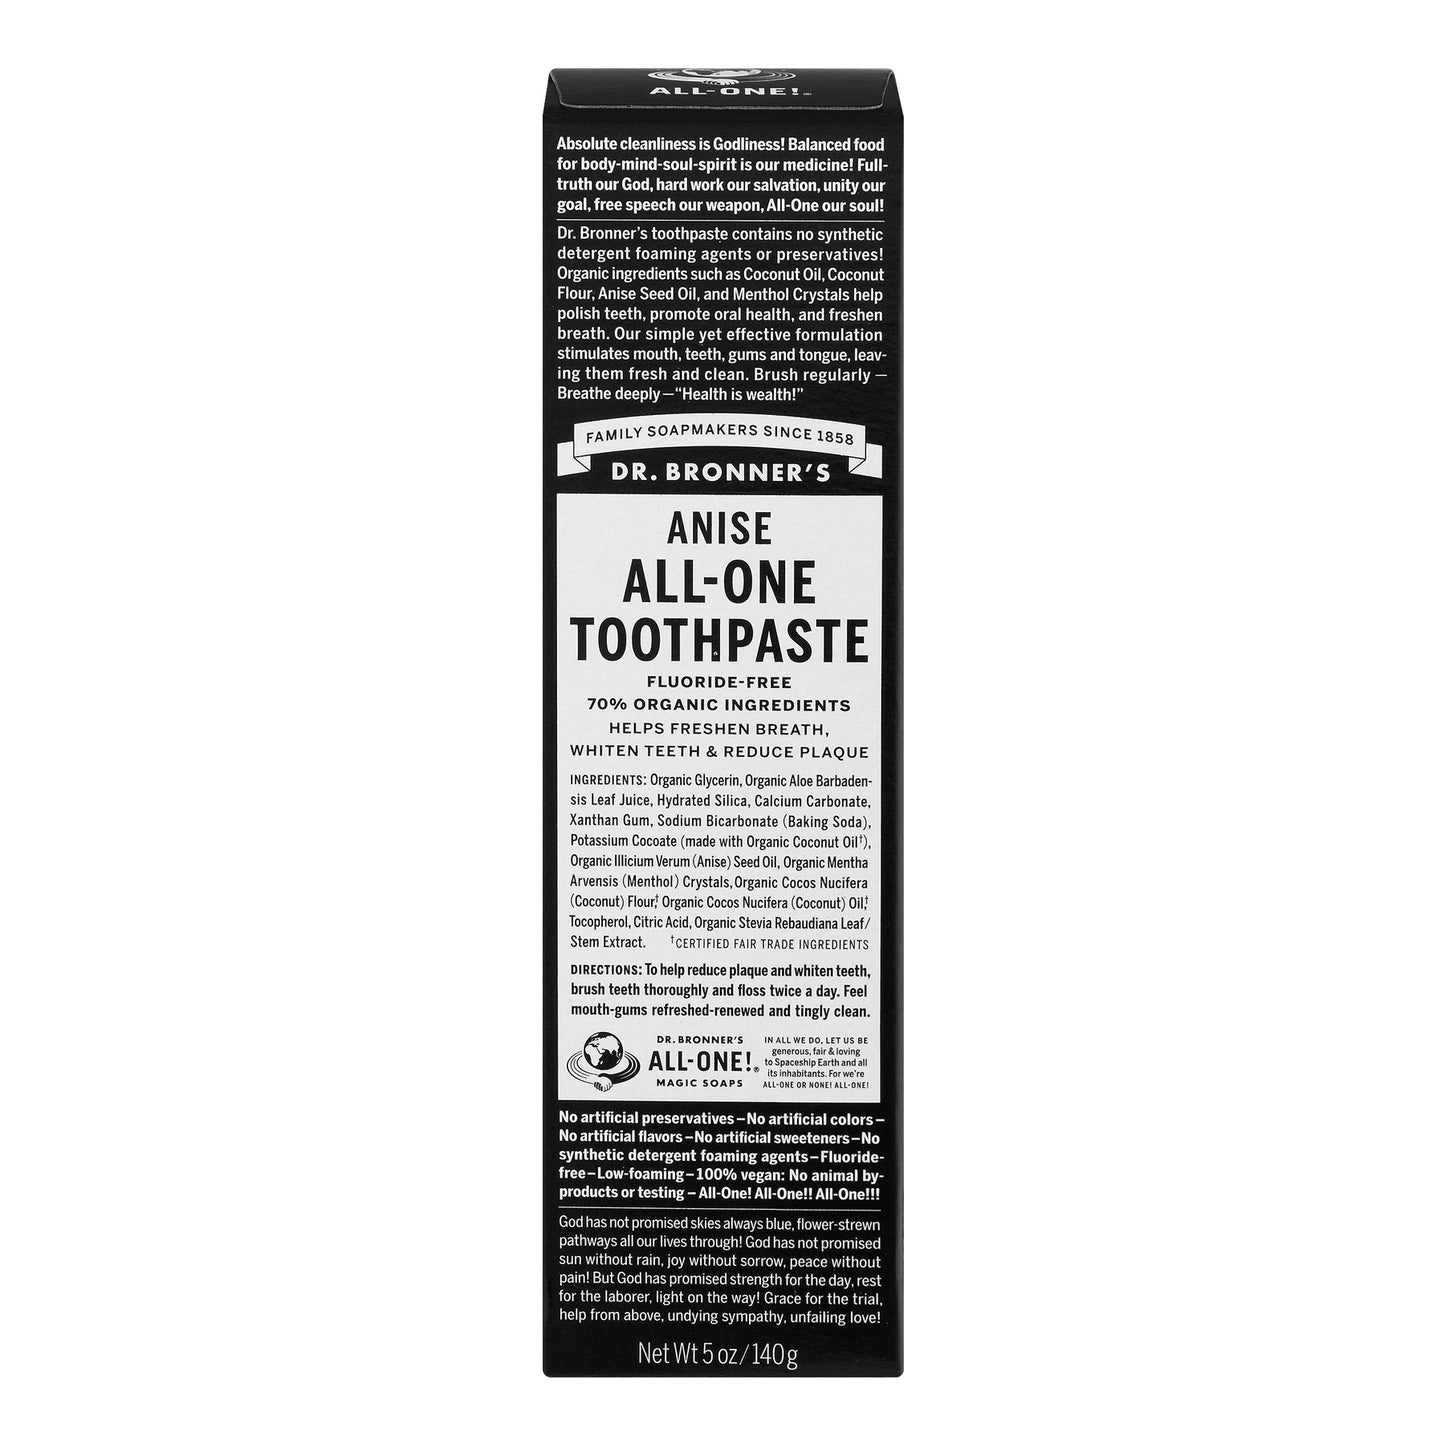 Dr. Bronner - All-One Toothpaste Anise, 5 oz